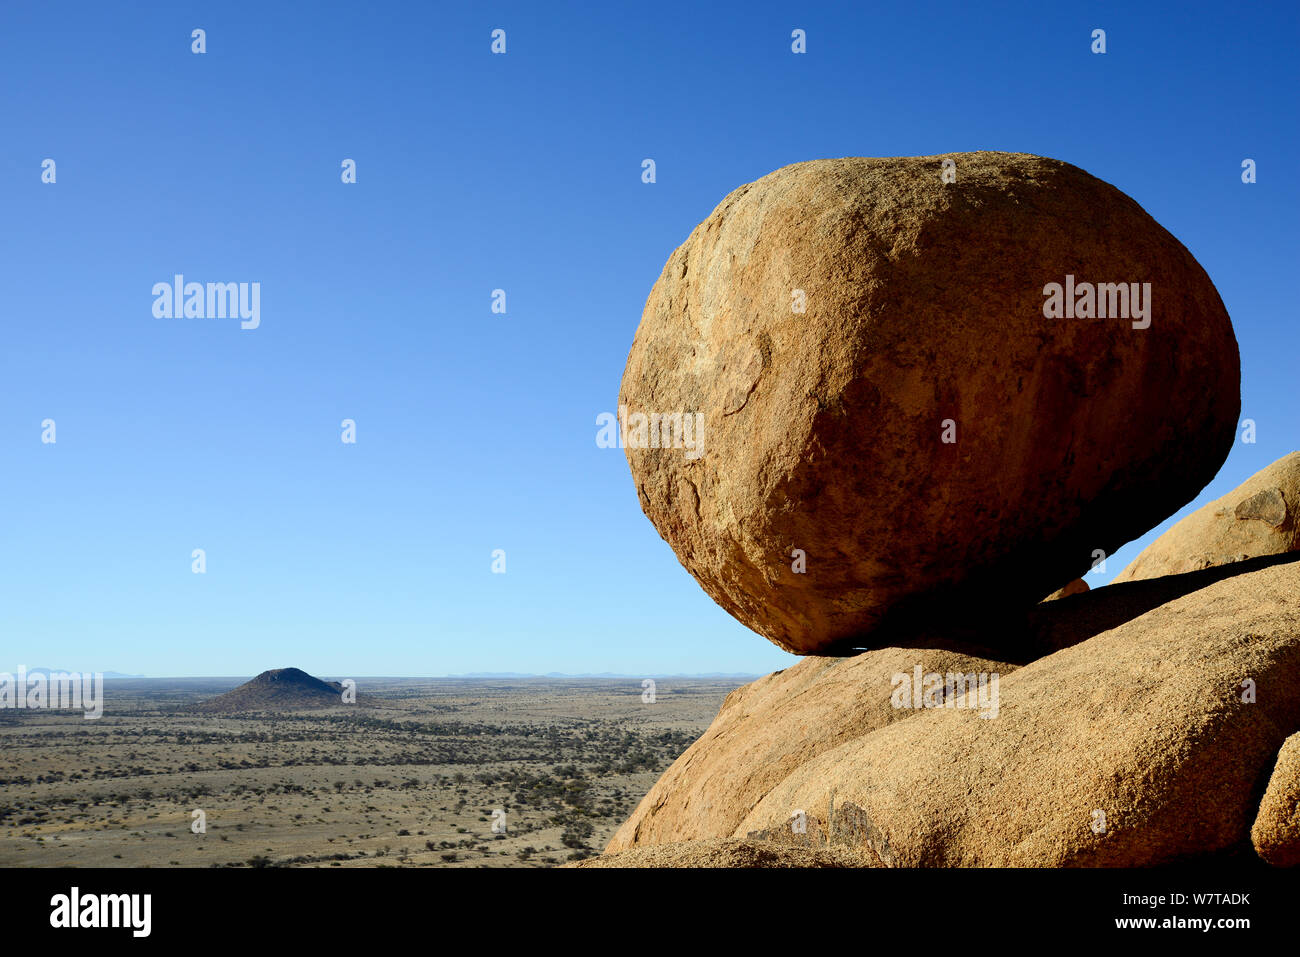 Boulder and landscape seen from the Spitzkoppe mountain range, Namibia. Stock Photo